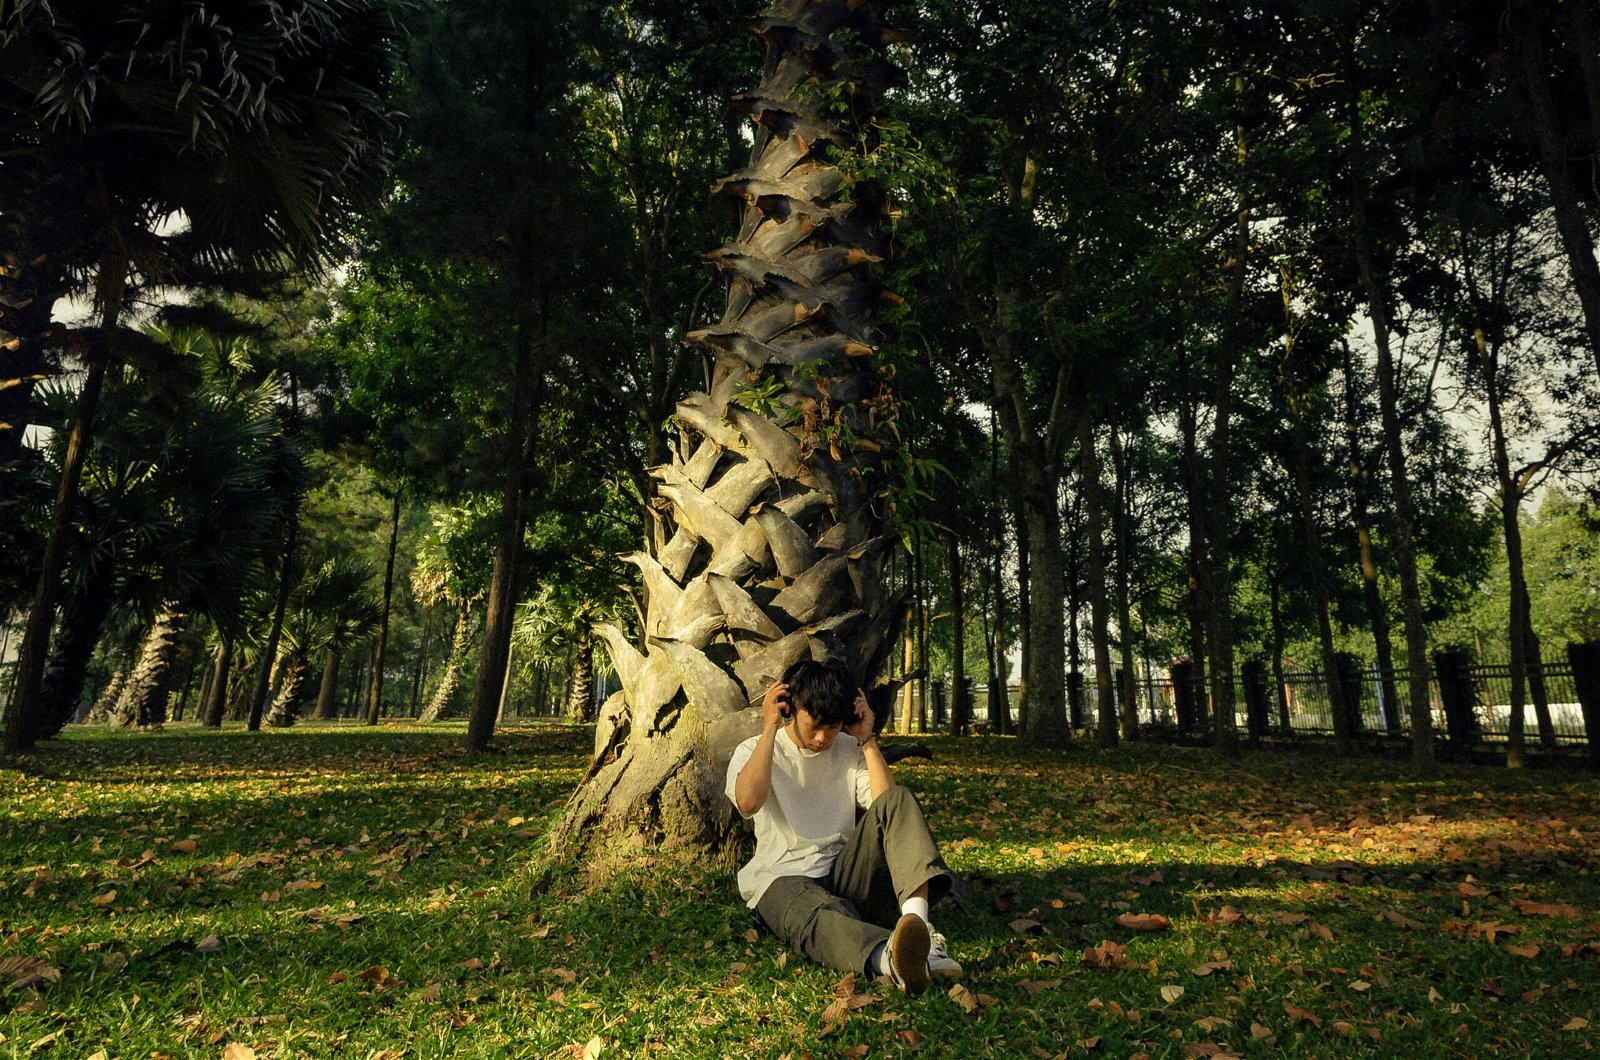 A person sitting against a tree in park with textured bark and foliage for visual weight